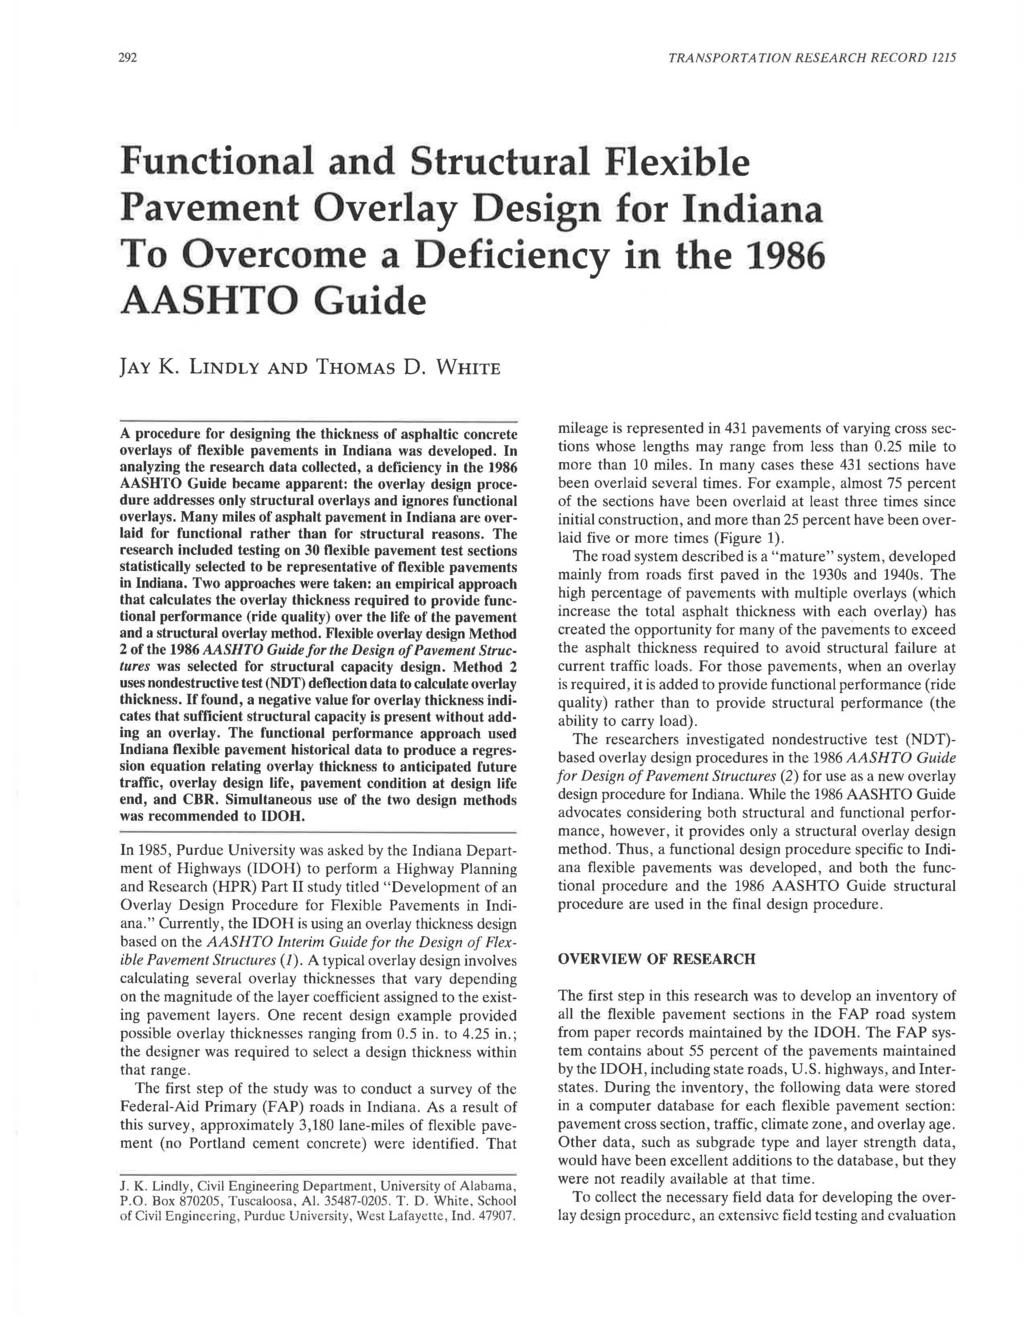 292 TRANSPORTA TJON RESEARCH RECORD 1215 Functional and Structural Flexible Pavement Overlay o esign for Indiana To Overcome a Deficiency in the 1986 AASHTO Guide JAY K. LINDLY AND THOMAS D.